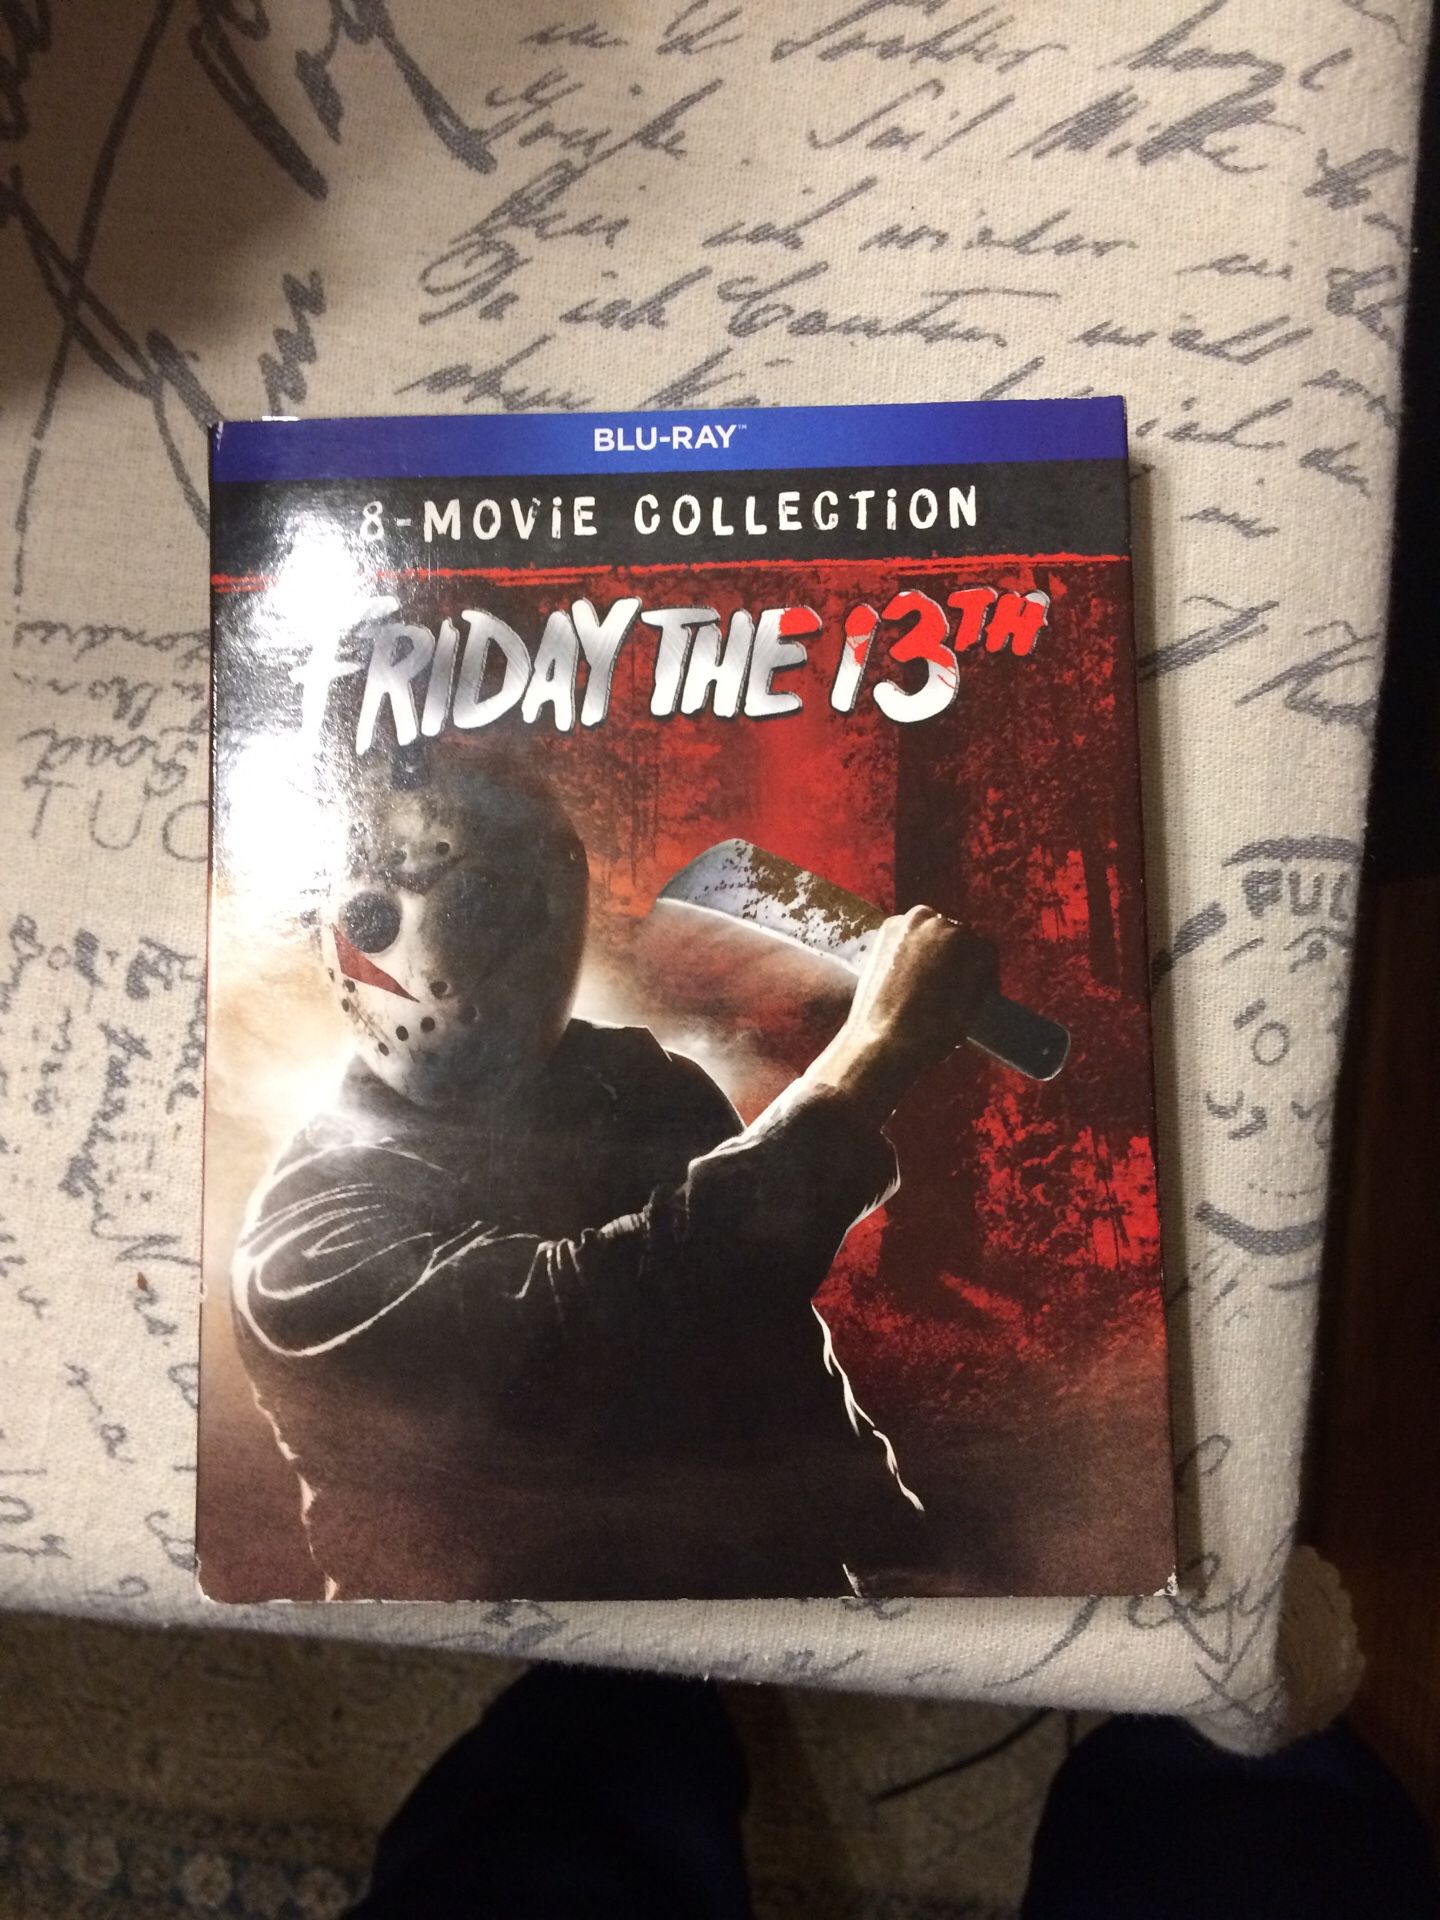 Friday the 13th 8 movie collection